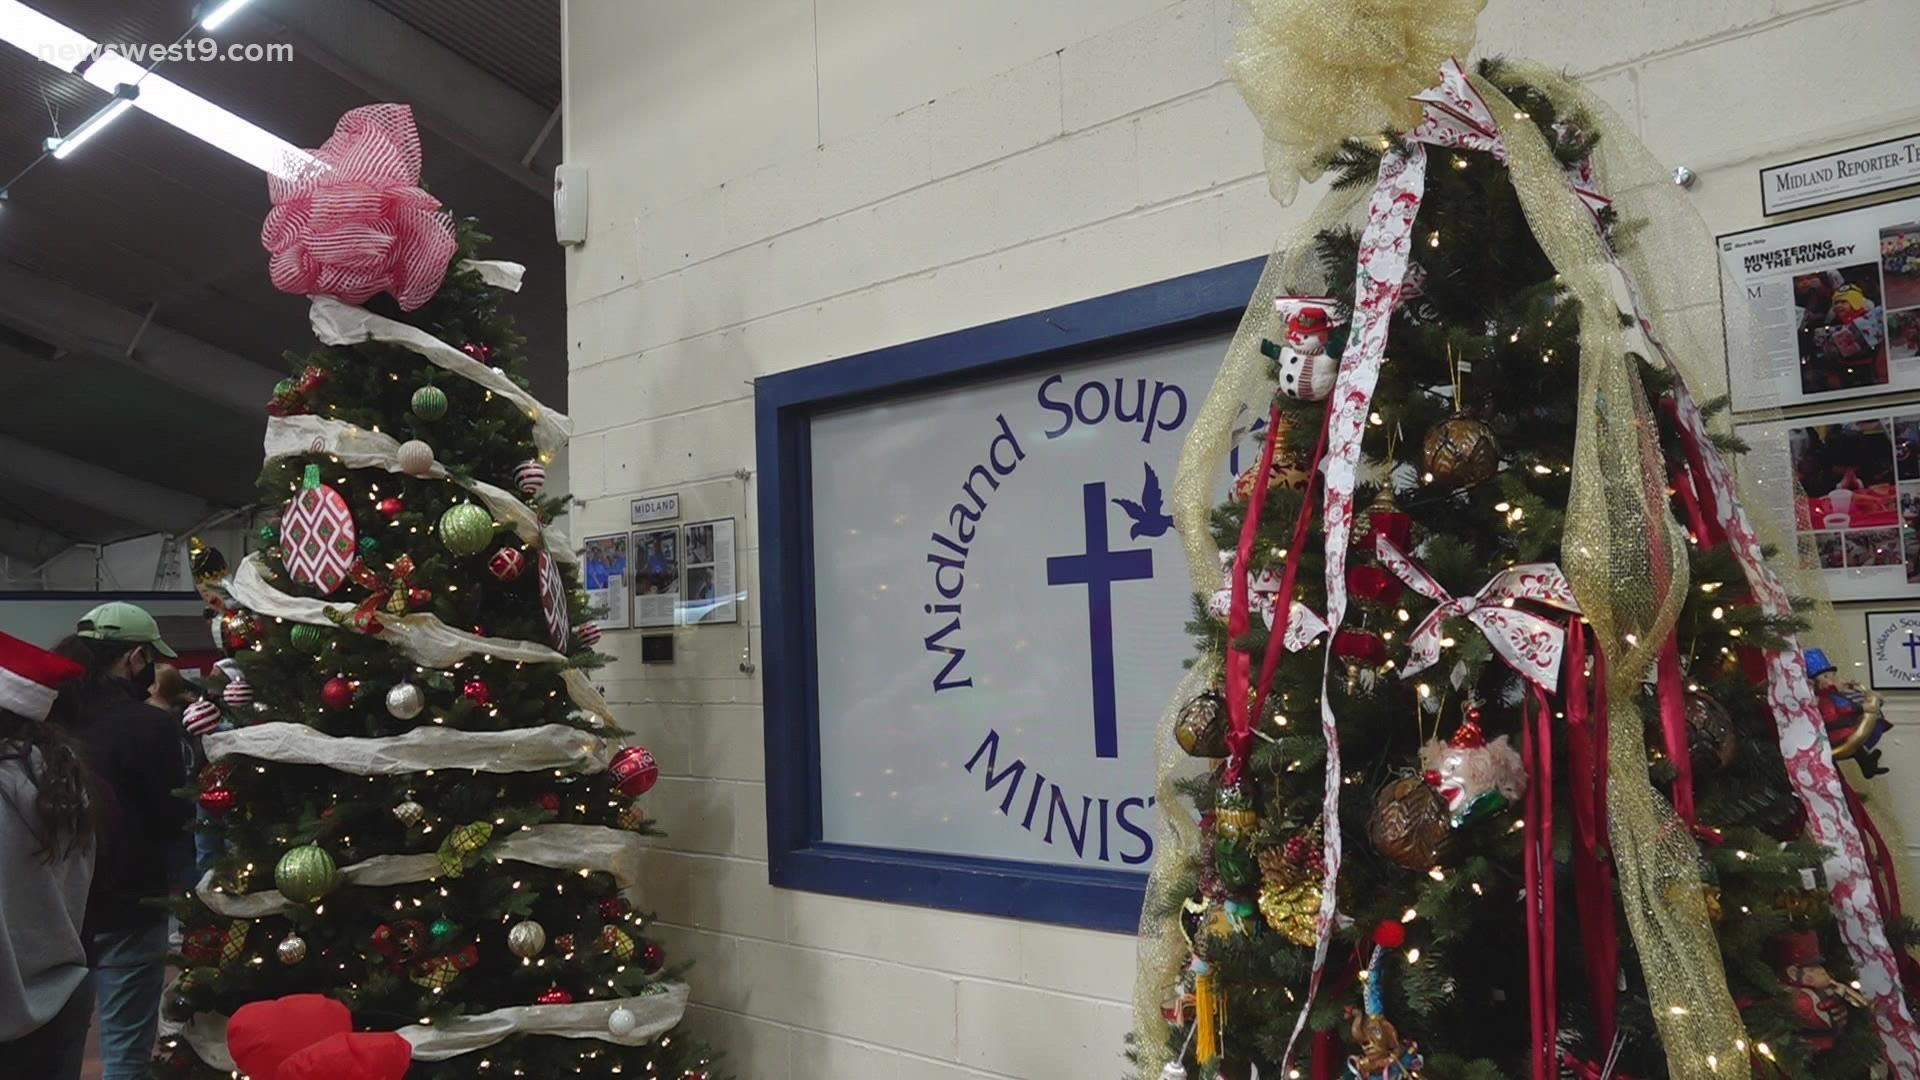 The soup kitchen served a free meal with a side of holiday cheer.